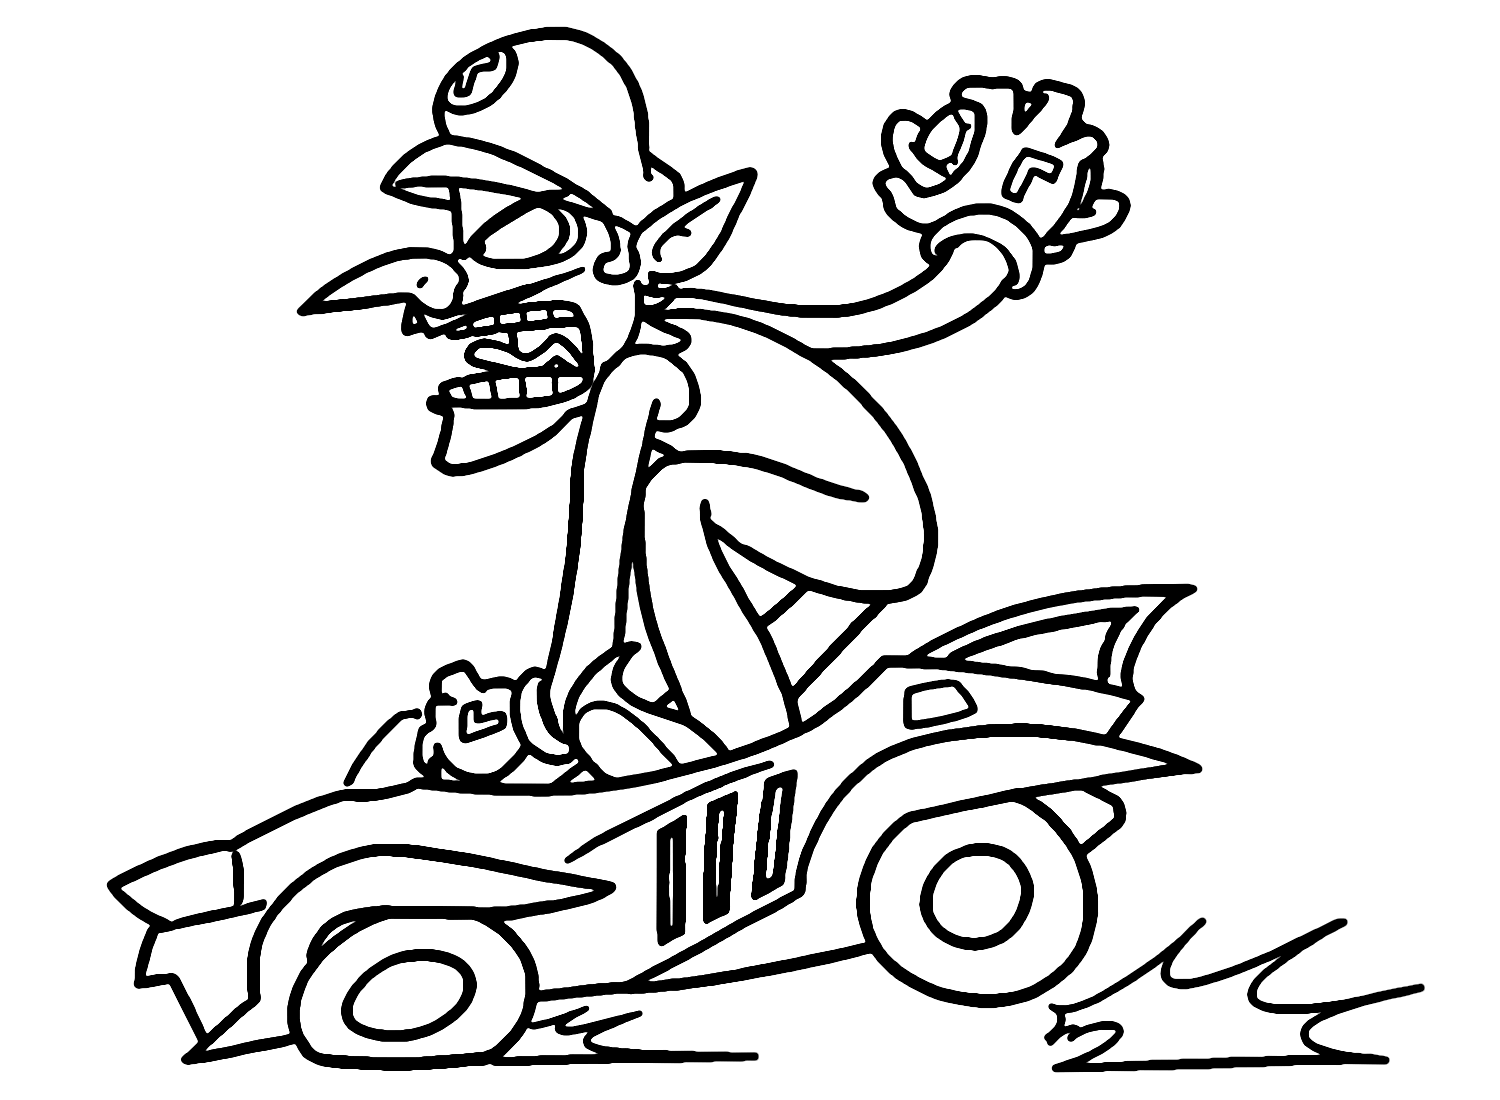 Waluigi with Car Coloring Page